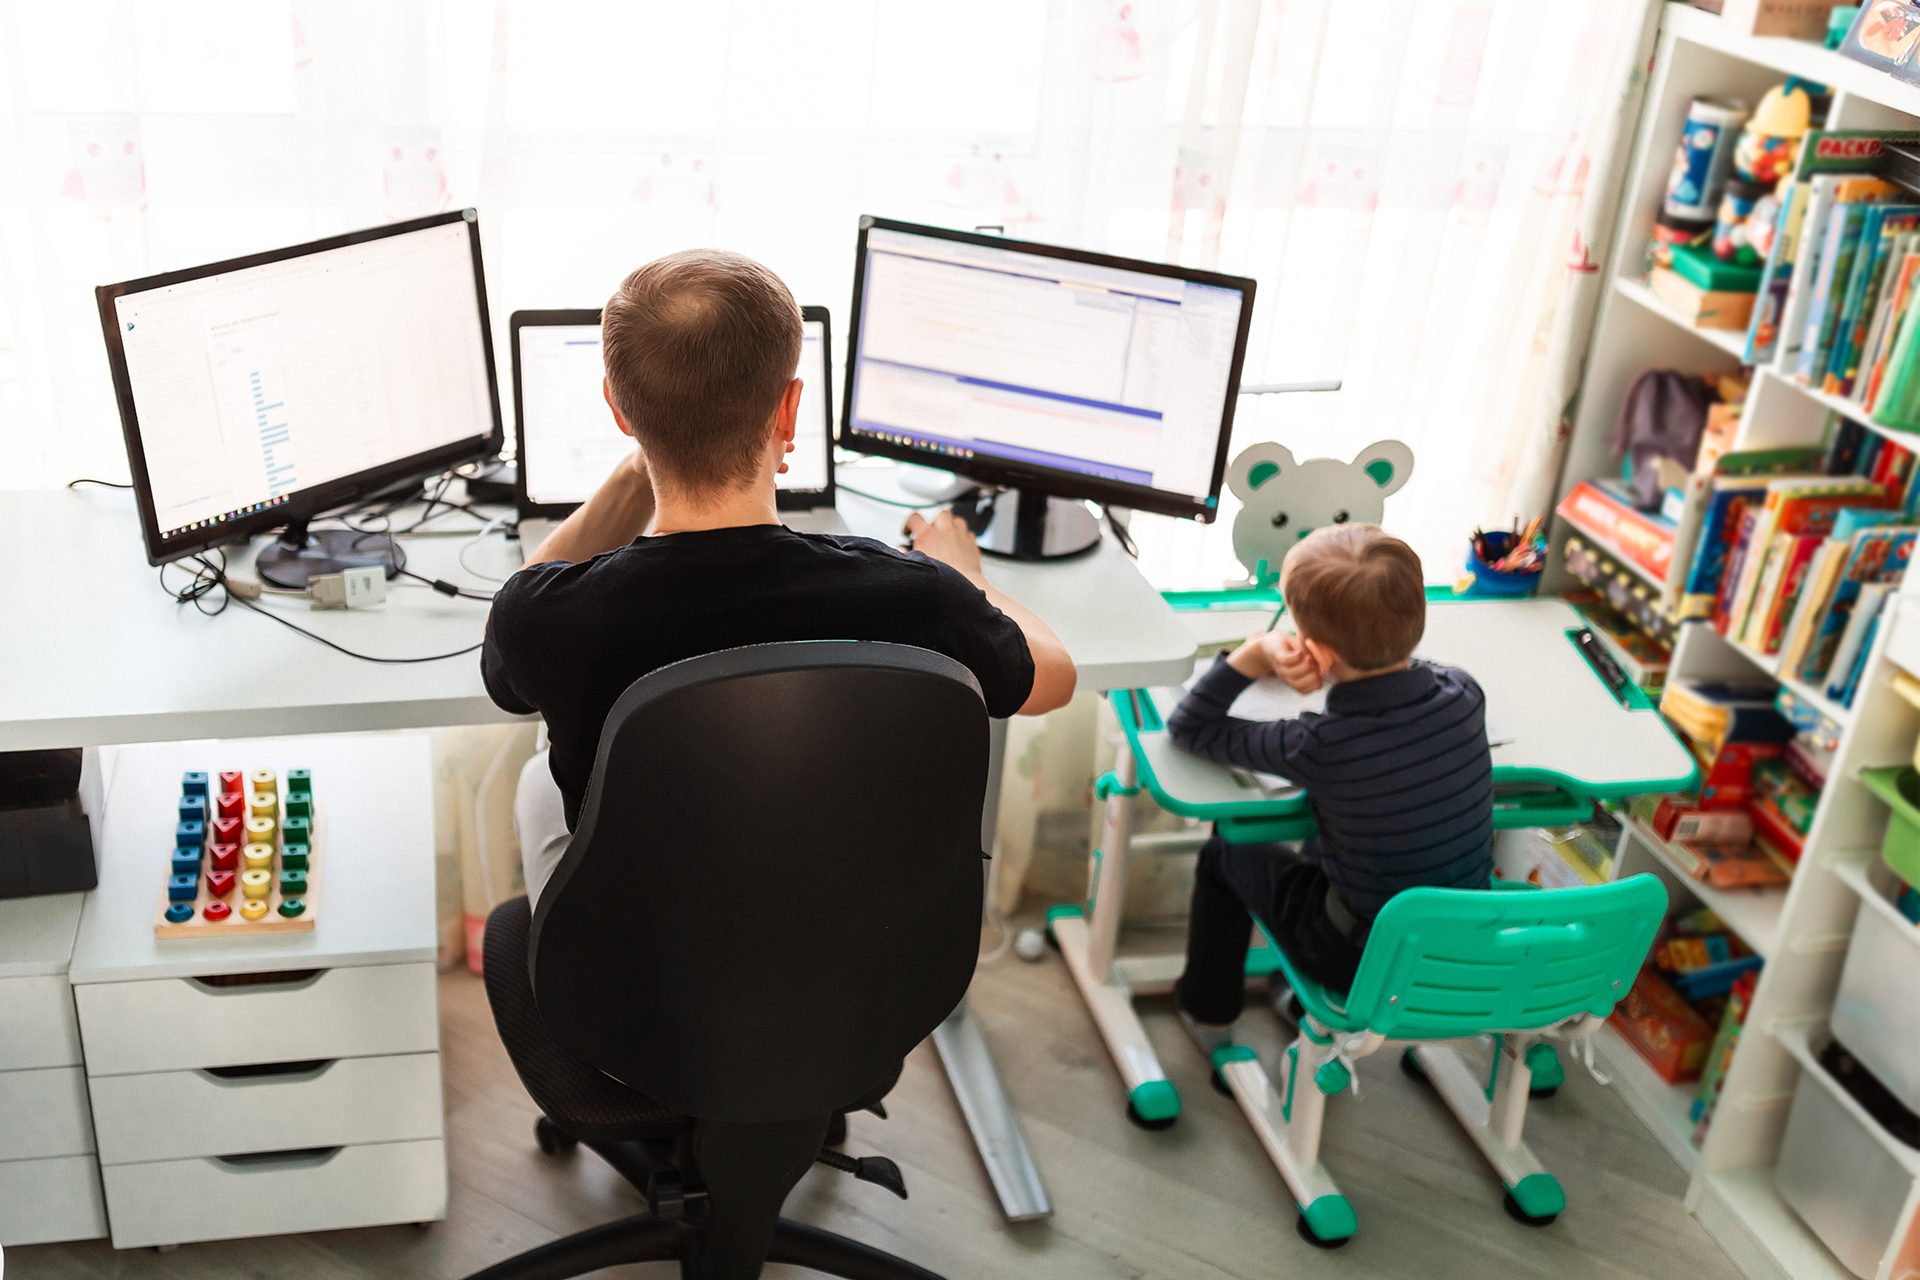 two children sitting at desks in front of computer monitors